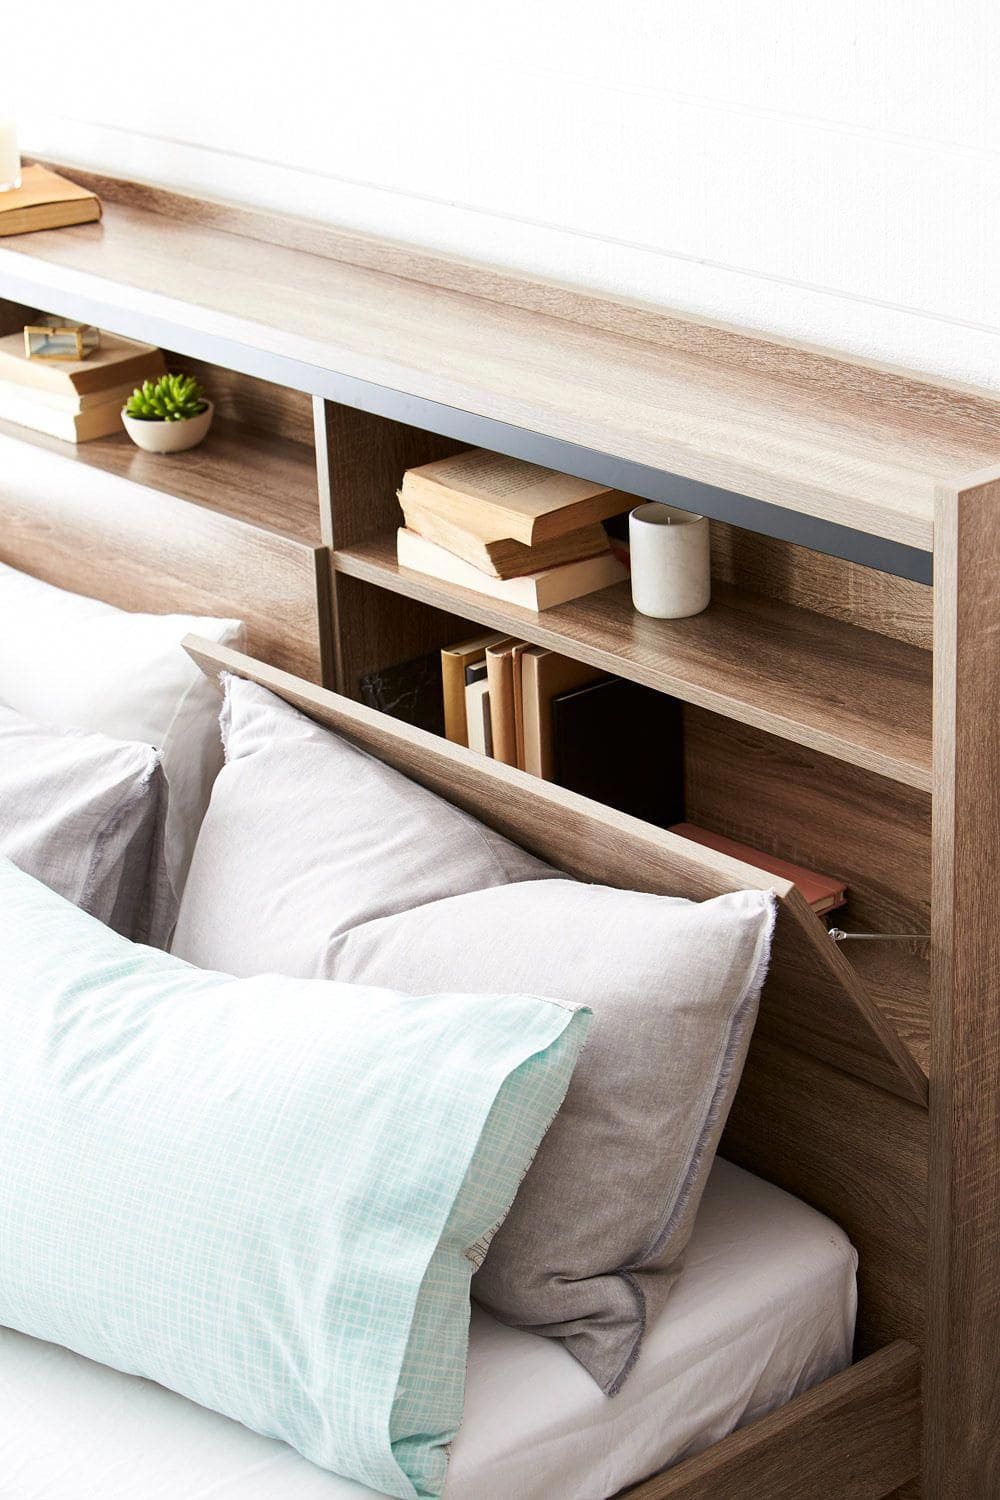 23 creative storage bed ideas to add to your bag - 163